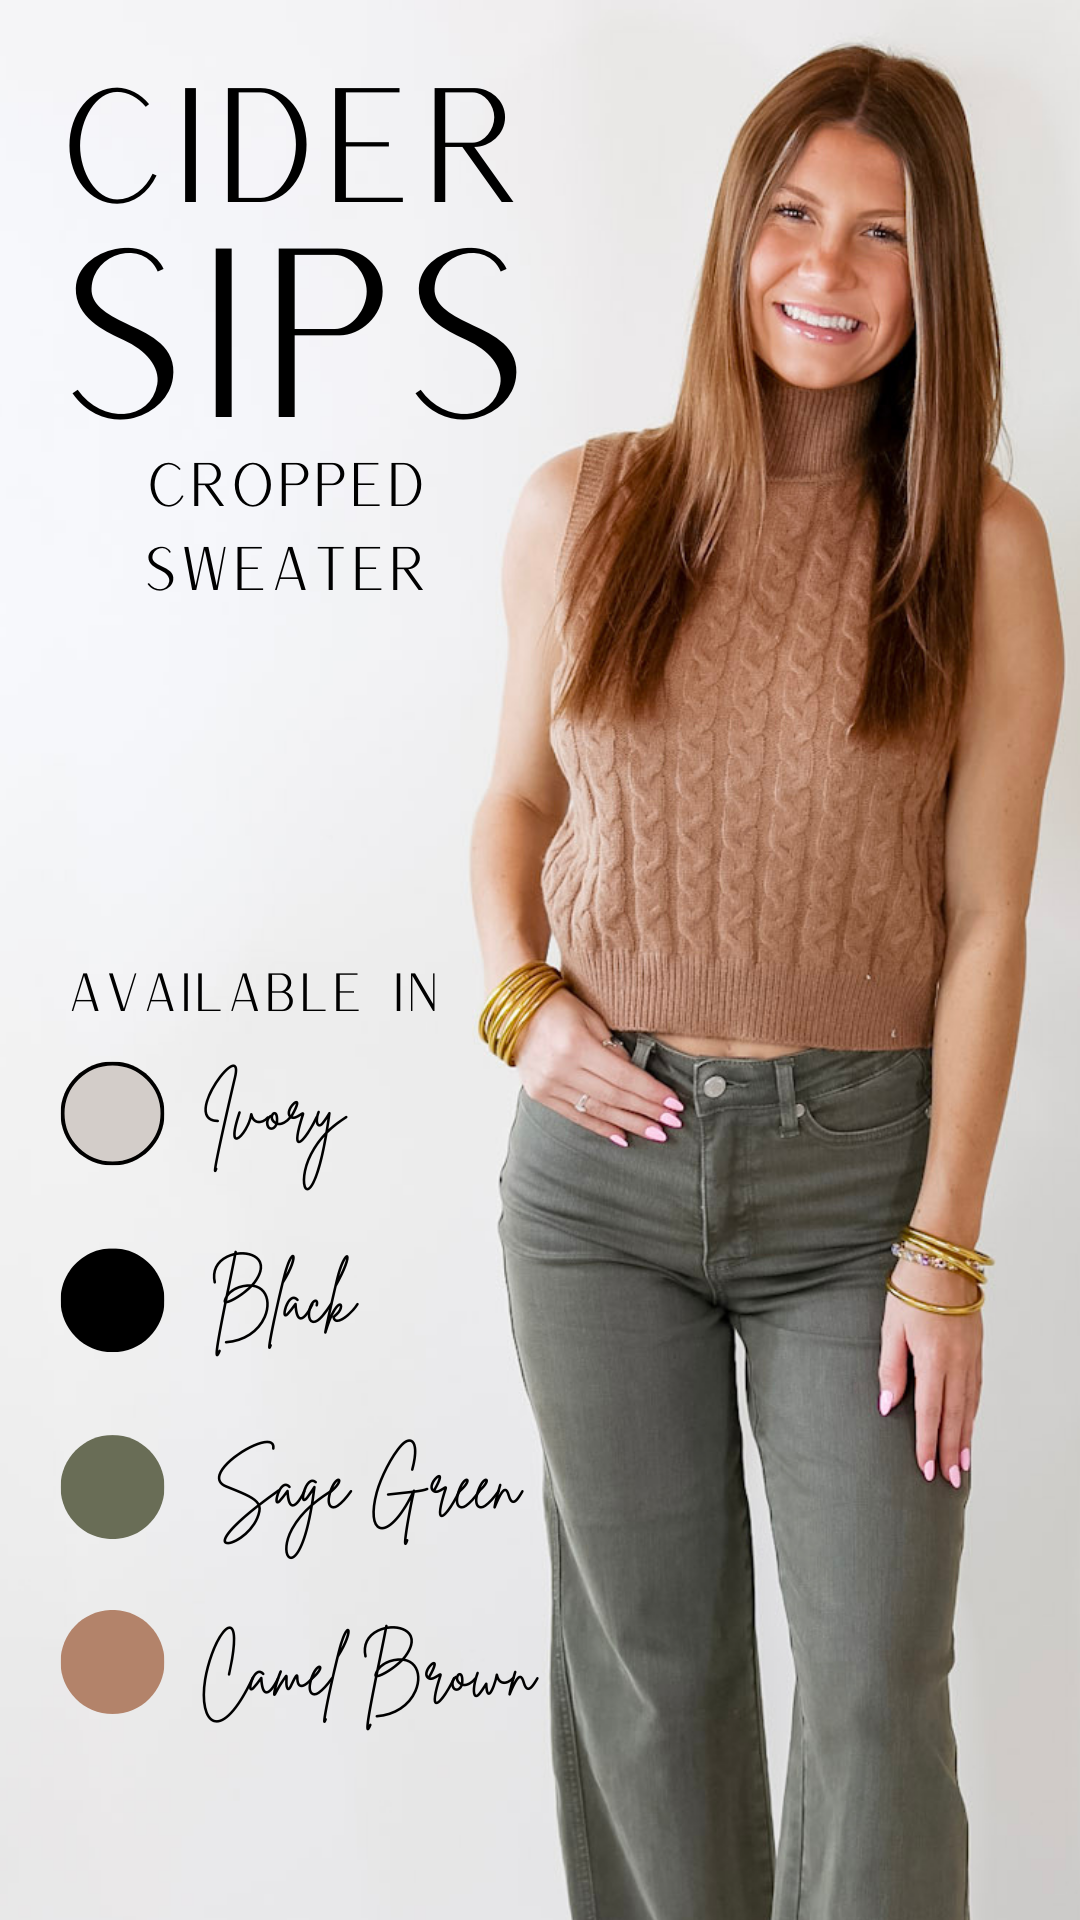 Cider Sips Cropped Sweater Tank Top with High Neck in Camel Brown